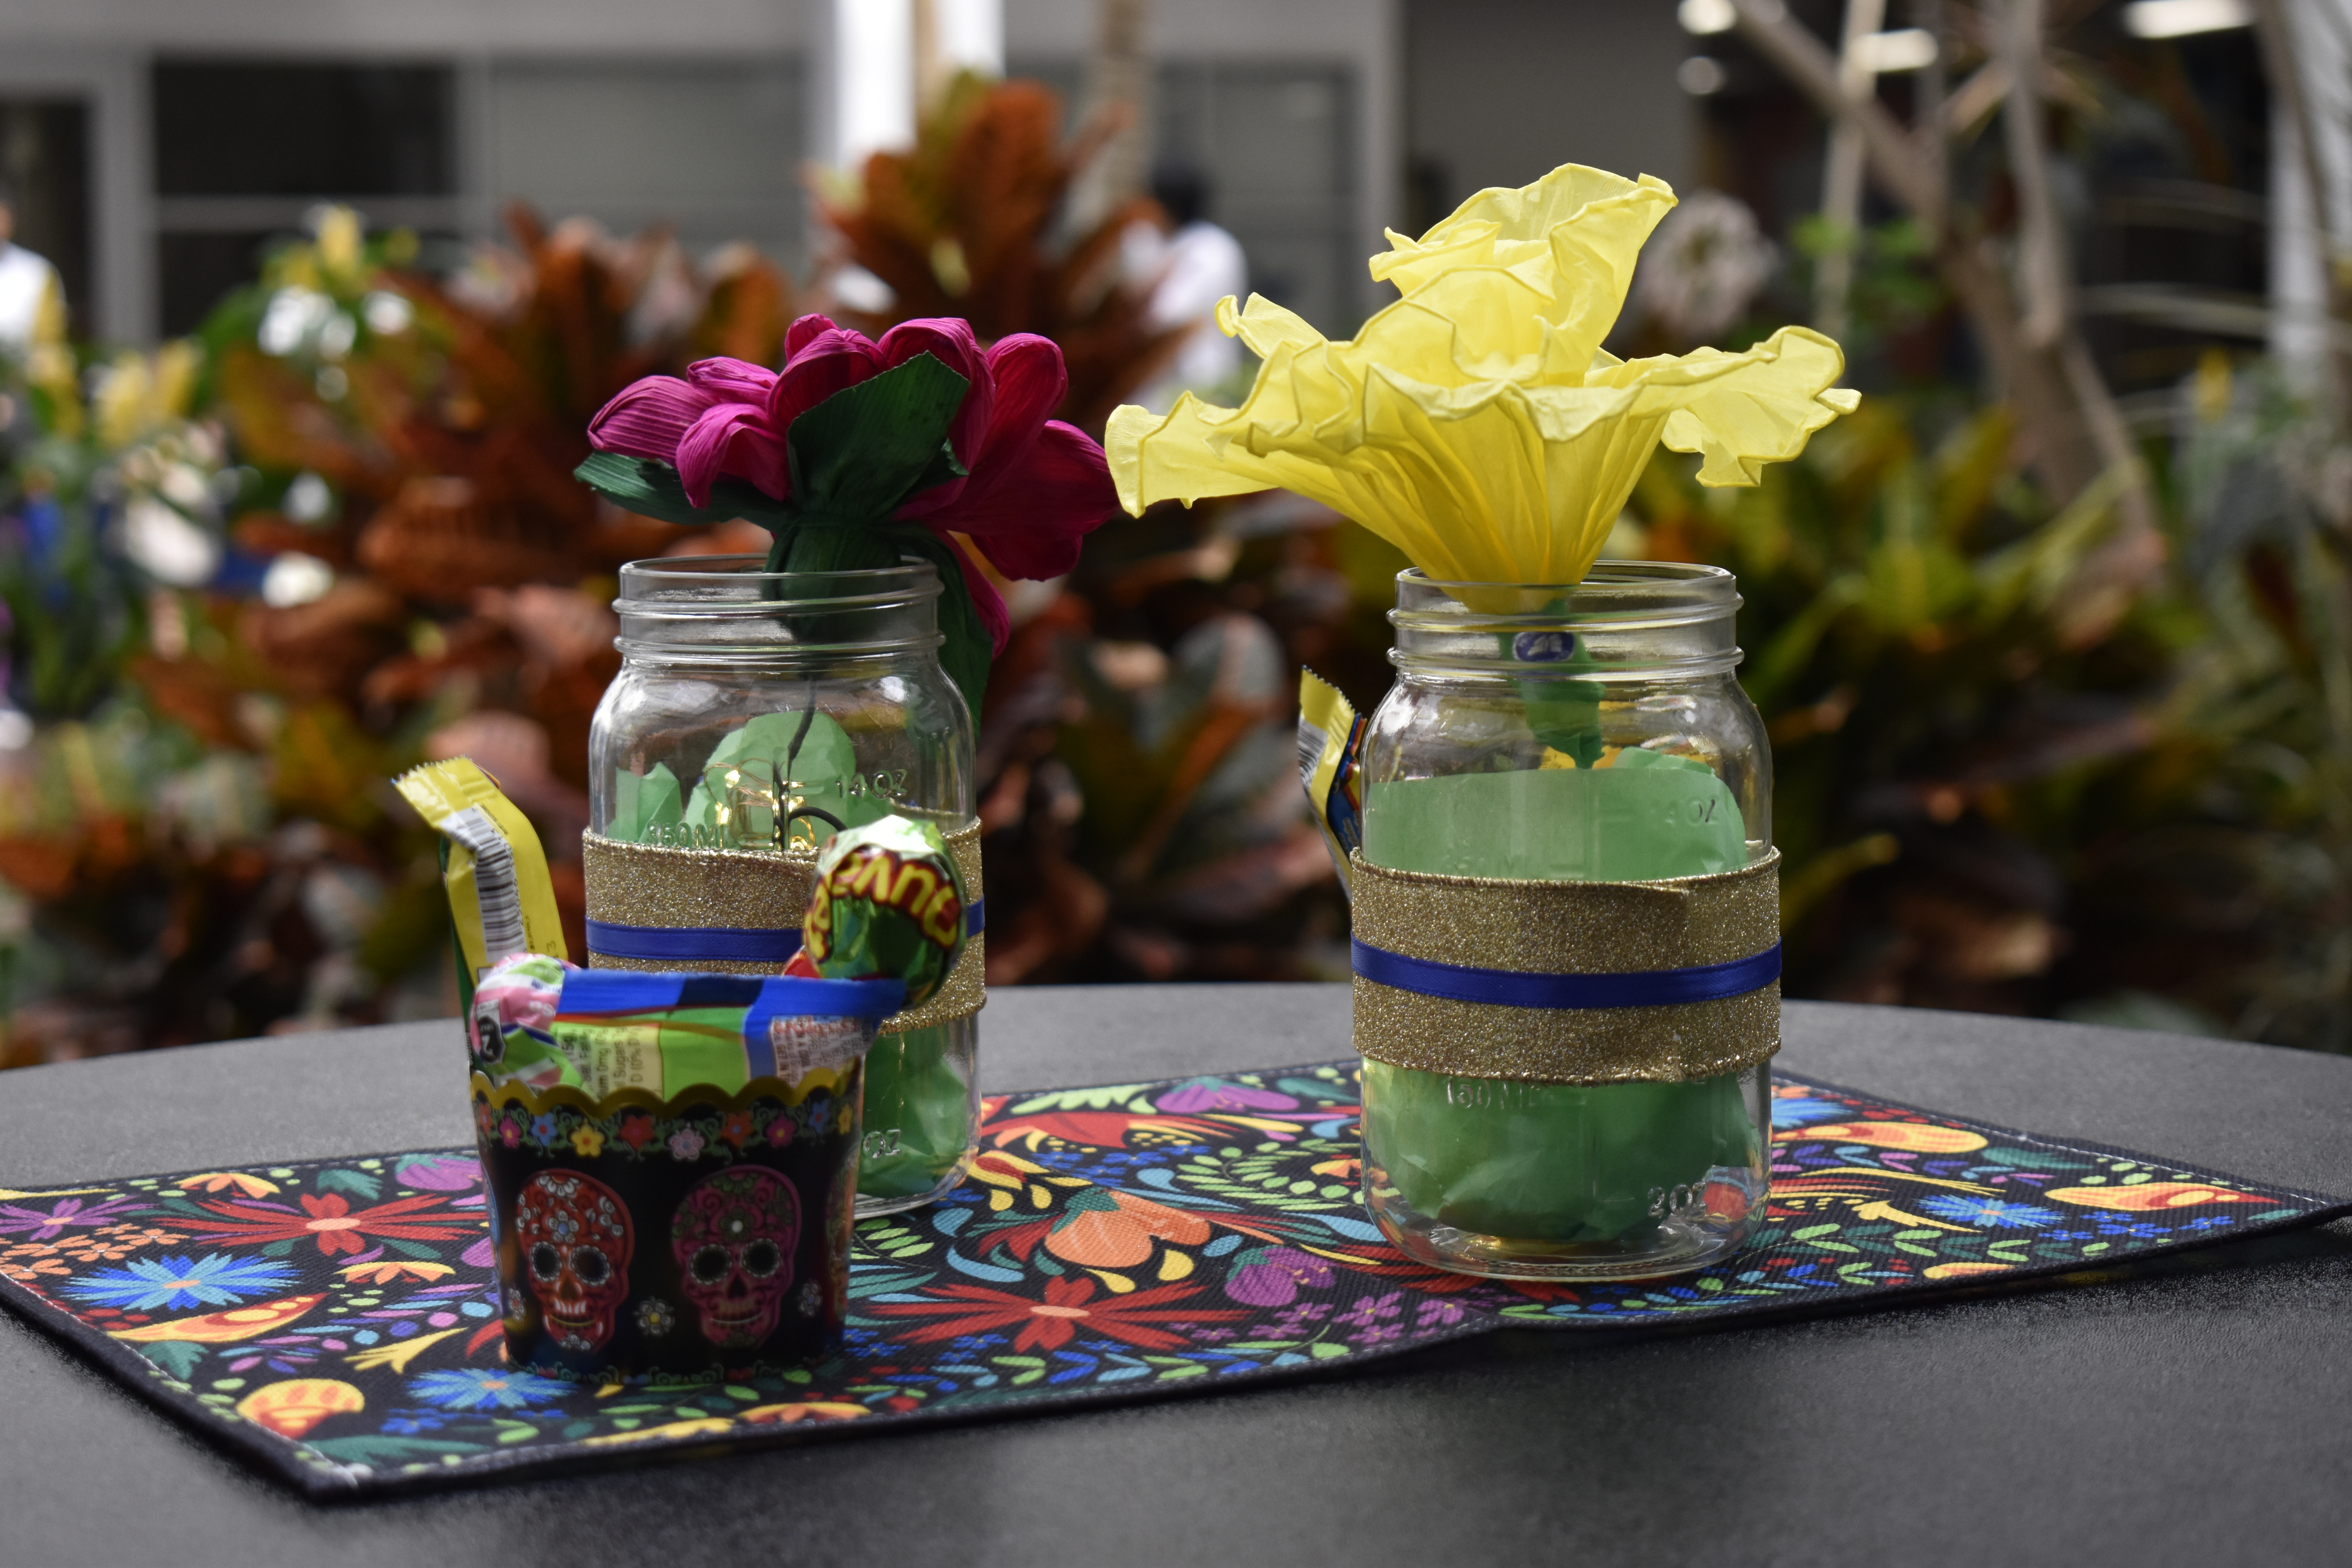 A festive table display of bright colors such as flowers and sugar skulls.